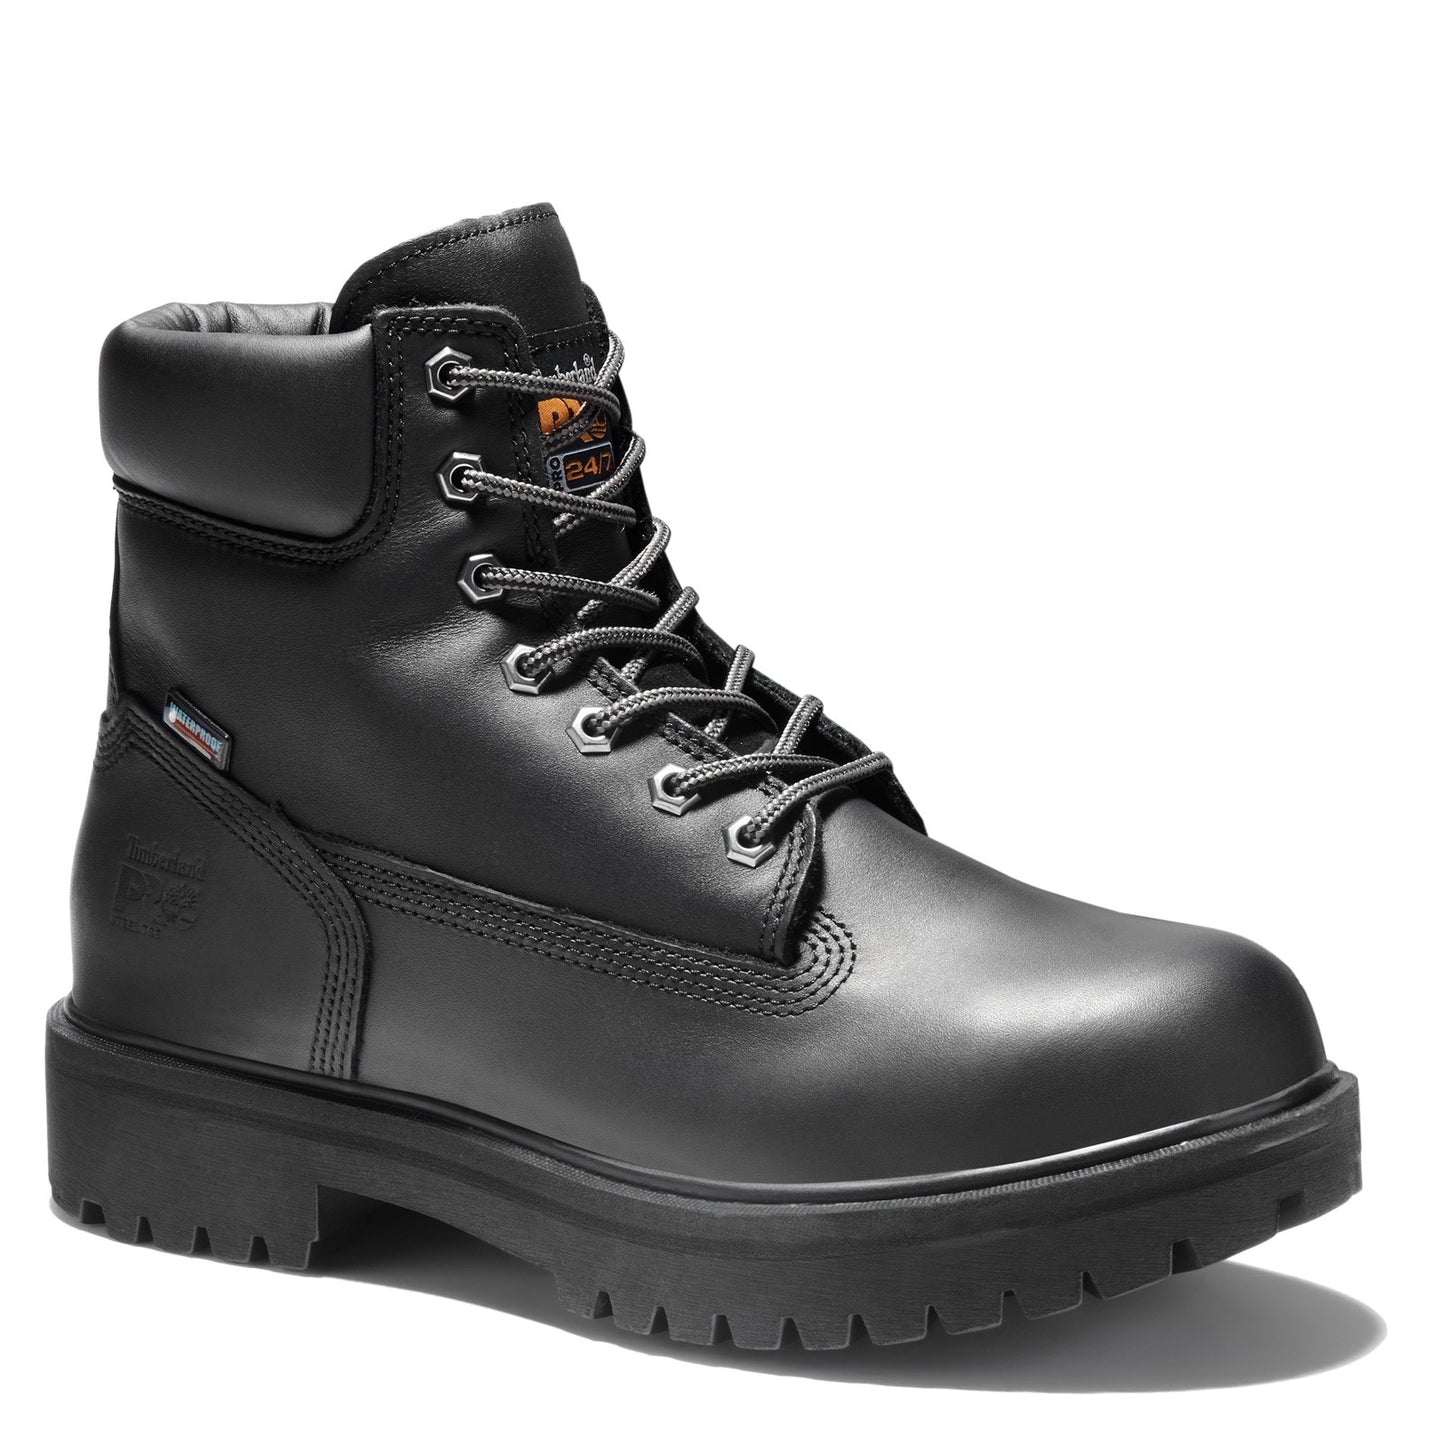 Peltz Shoes  Men's Timberland Pro 6 In Direct Attach ST WP Insulated 200g Boot BLACK TB026038001